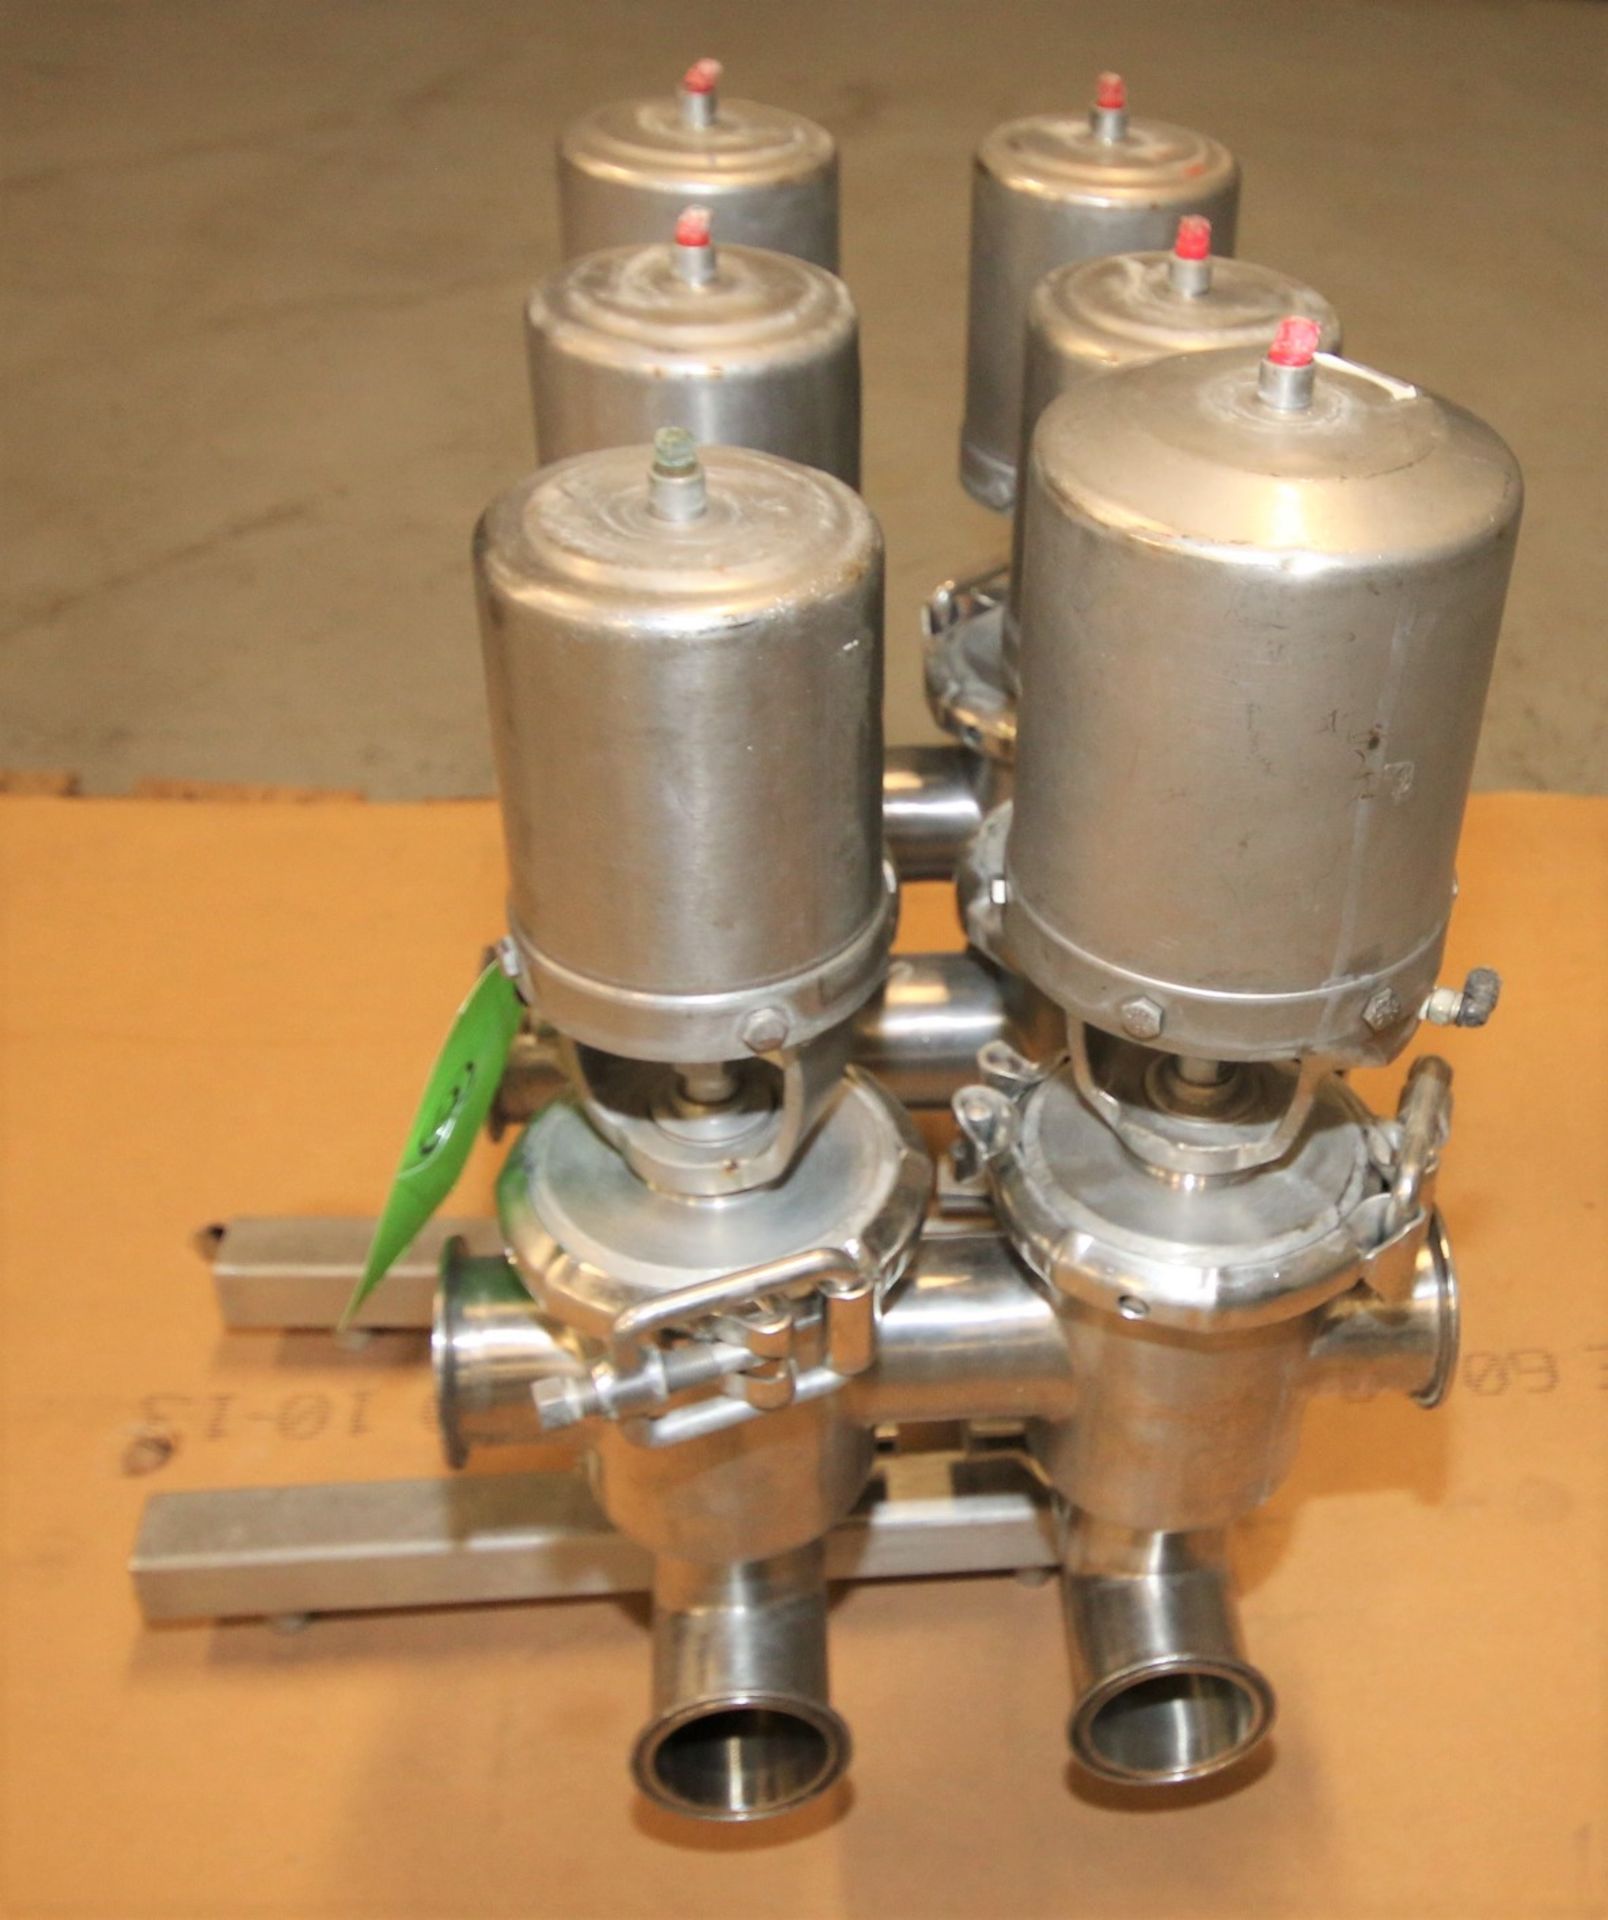 6-Valve WCB 2-1/2" S/S Air Valve Manifold / Cluster with Model 61C Valves - Image 2 of 4